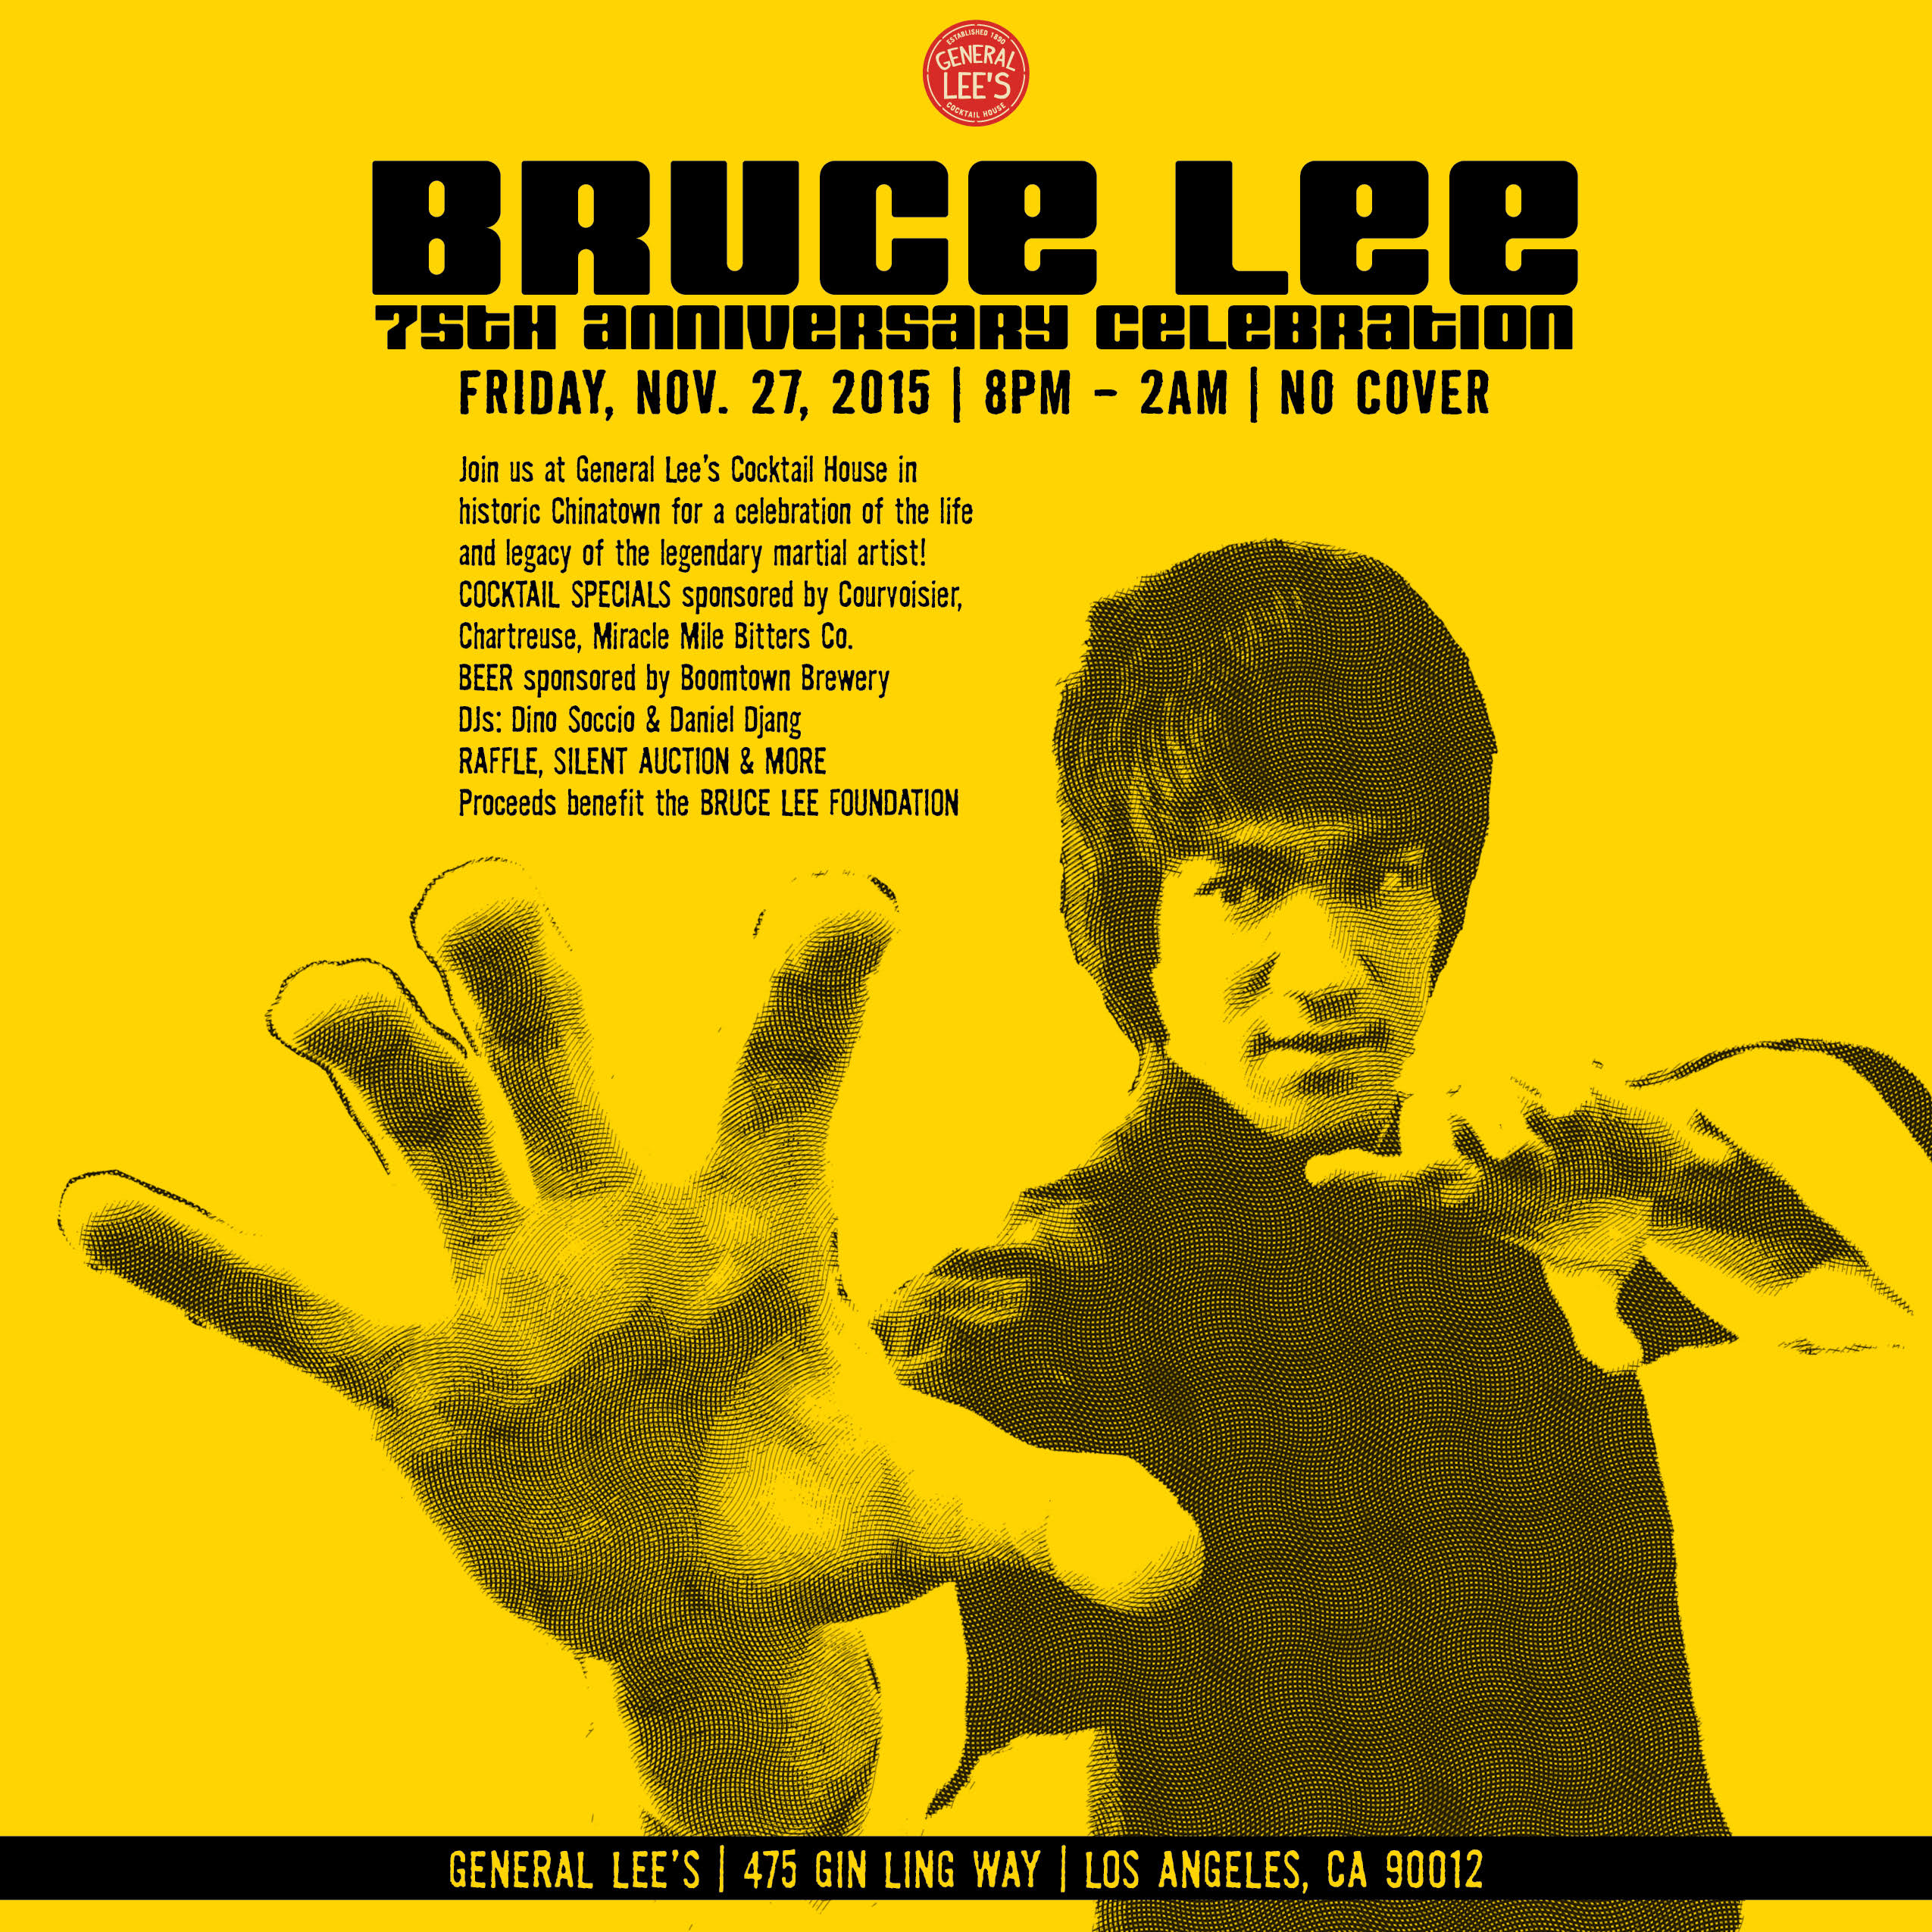 Bruce Lee 75th Anniversary at General Lee's